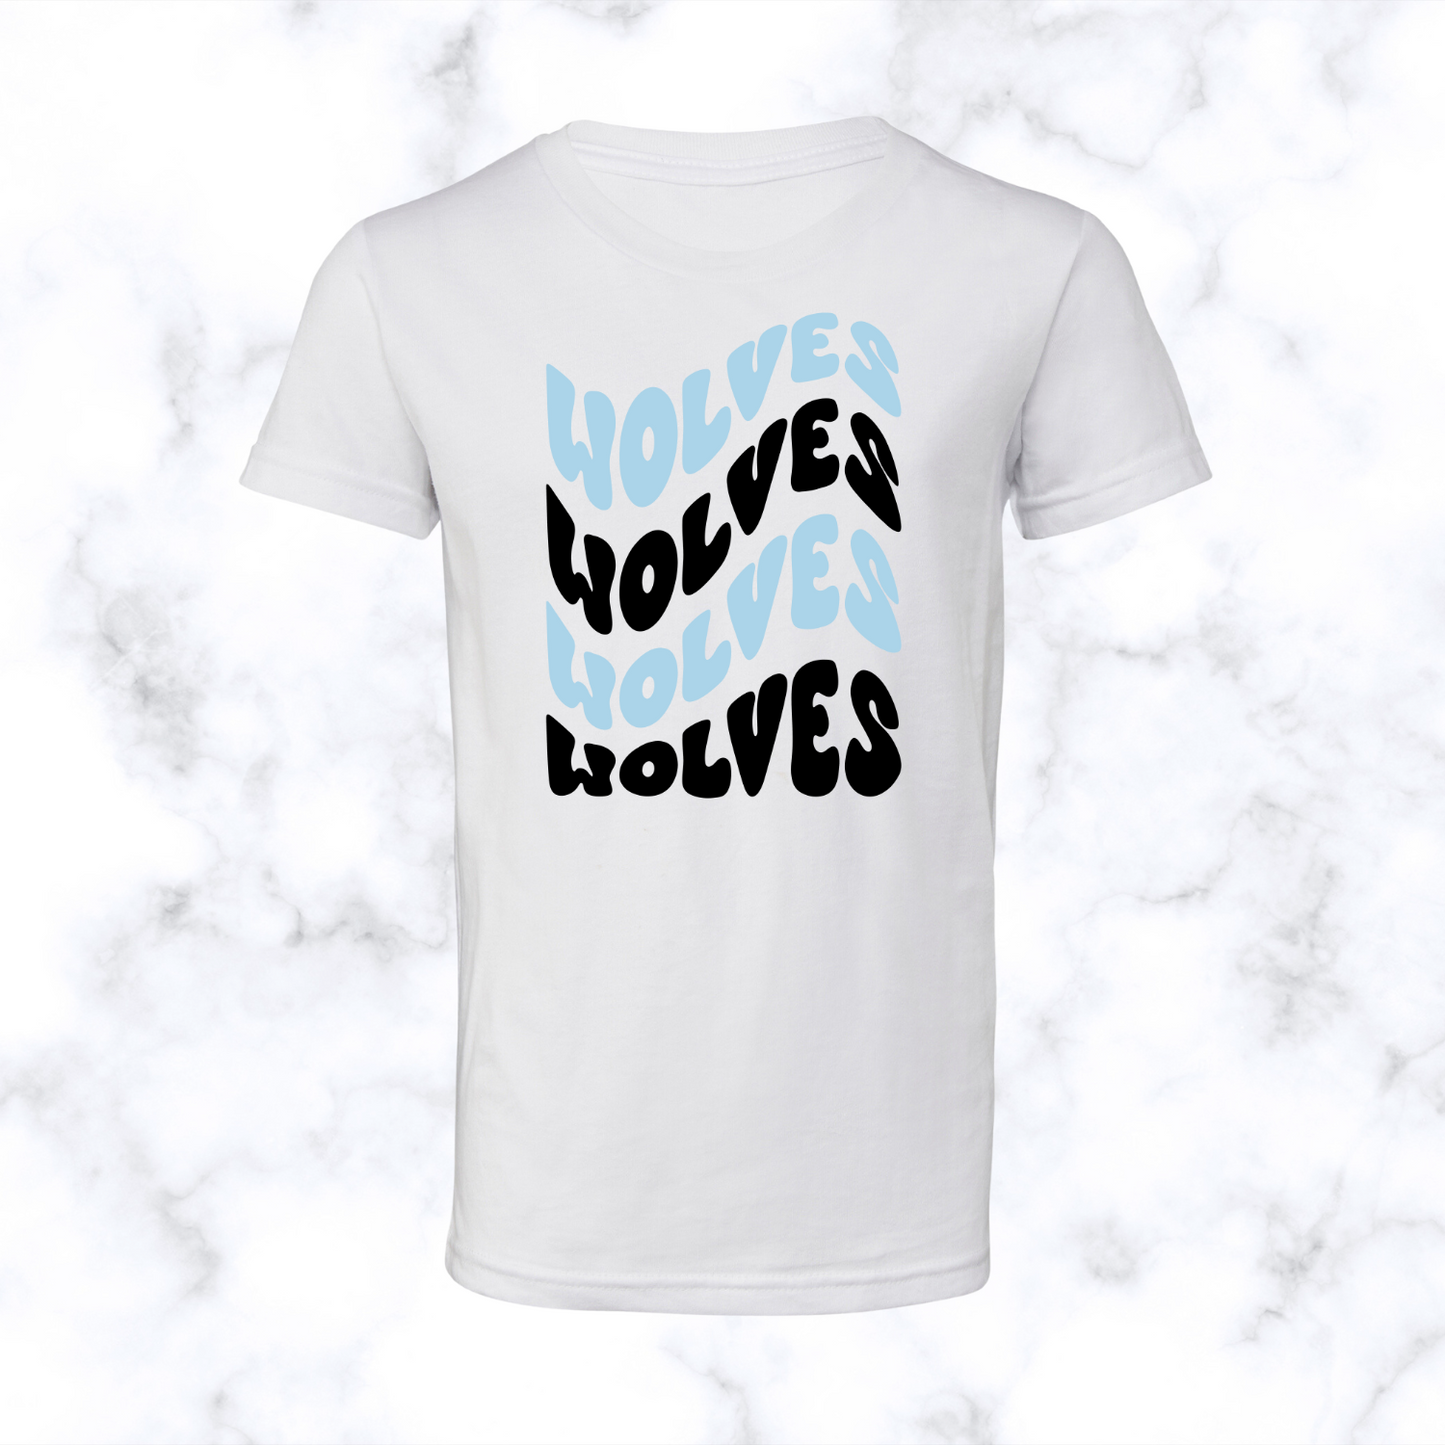 Wolves Wavy Tee Adult